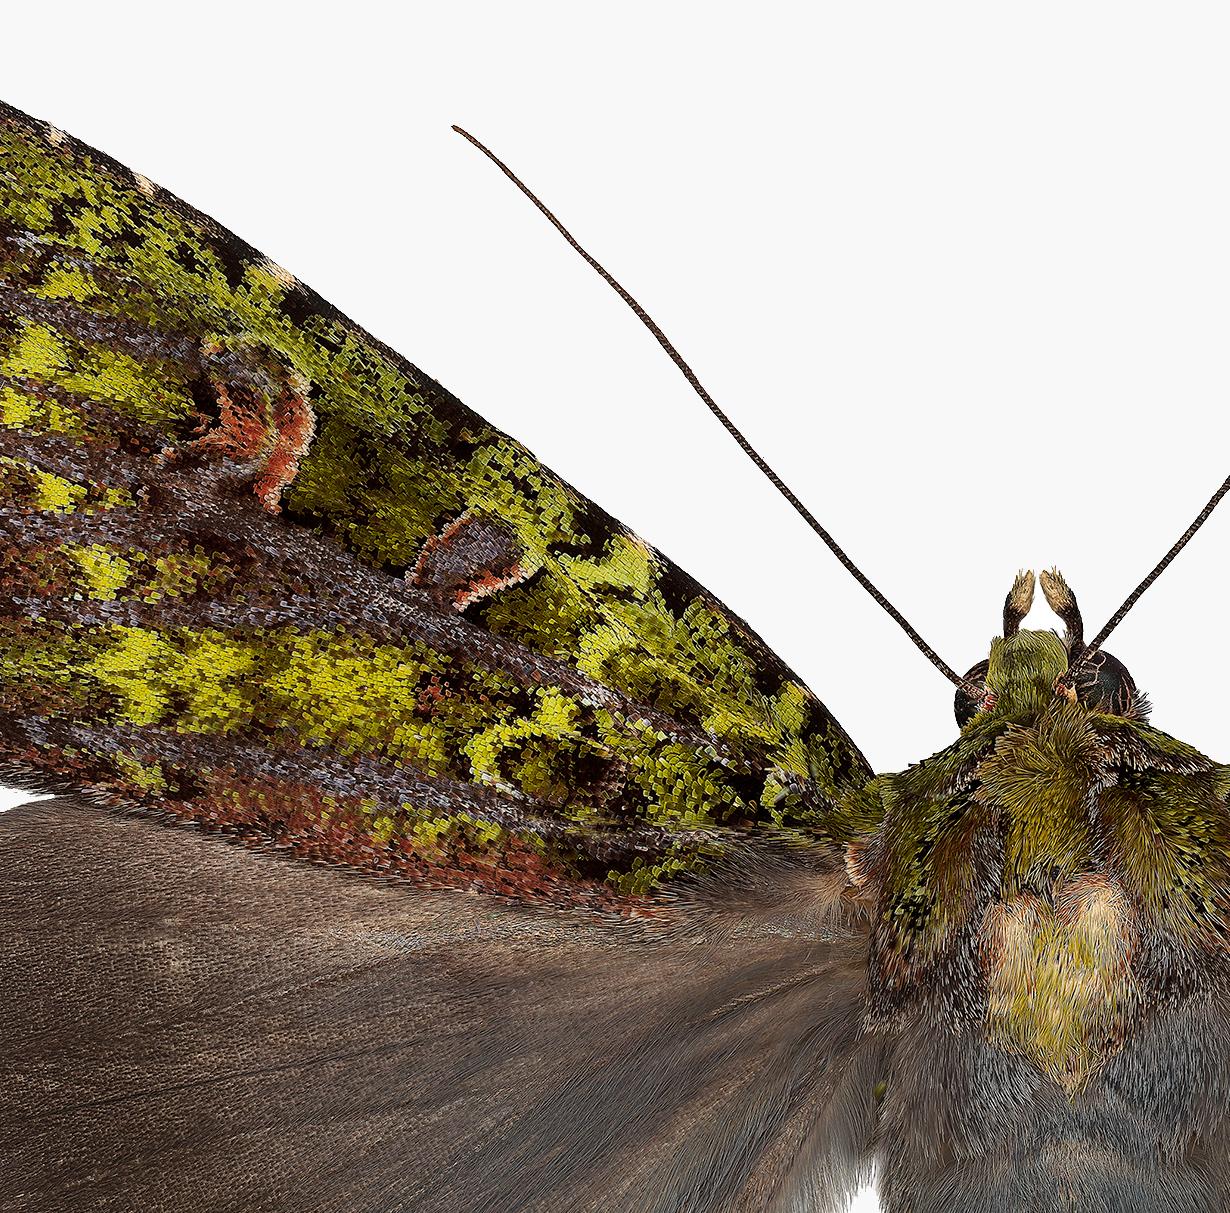 In this hyper-detailed archival pigment print on watercolor paper, a brown moth with a luminous, golden shade of olive green markings on its upper wings is dramatic against a solid white background. 

Price shown is the unframed price. Please